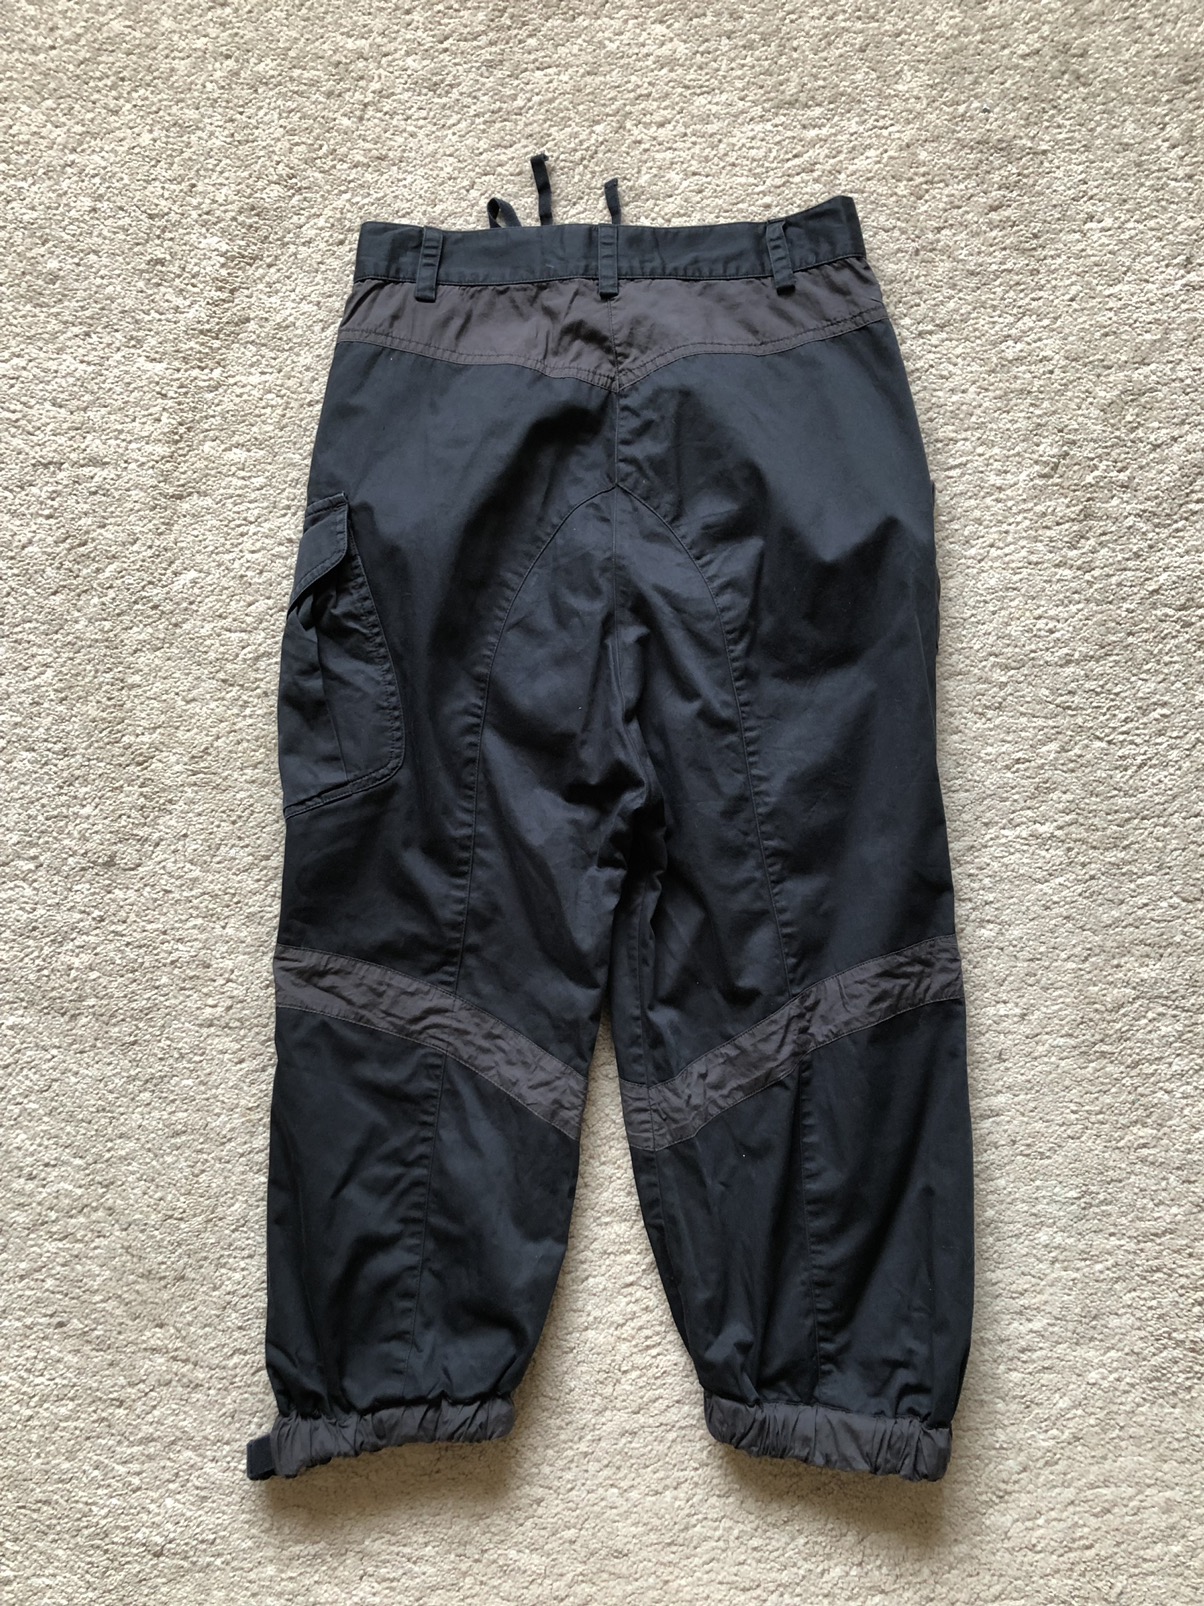 2000s Alexander Mcqueen Reconstruct Ankle Length Cargo Pant - 7